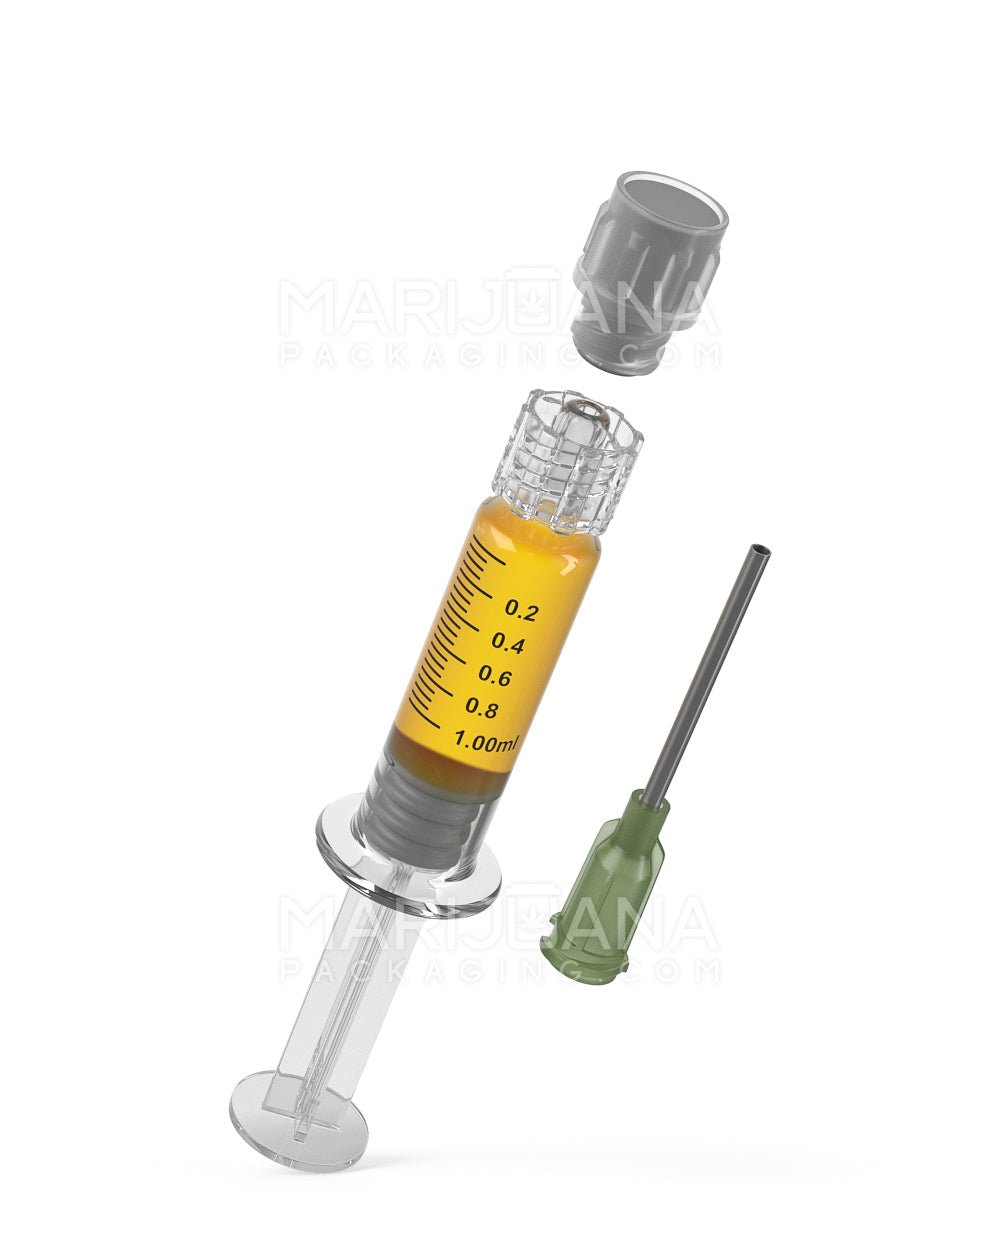 Luer Lock | Glass Dab Applicator Syringes w/ Needle Tip | 1mL - 0.2mL Increments - 100 Count - 6